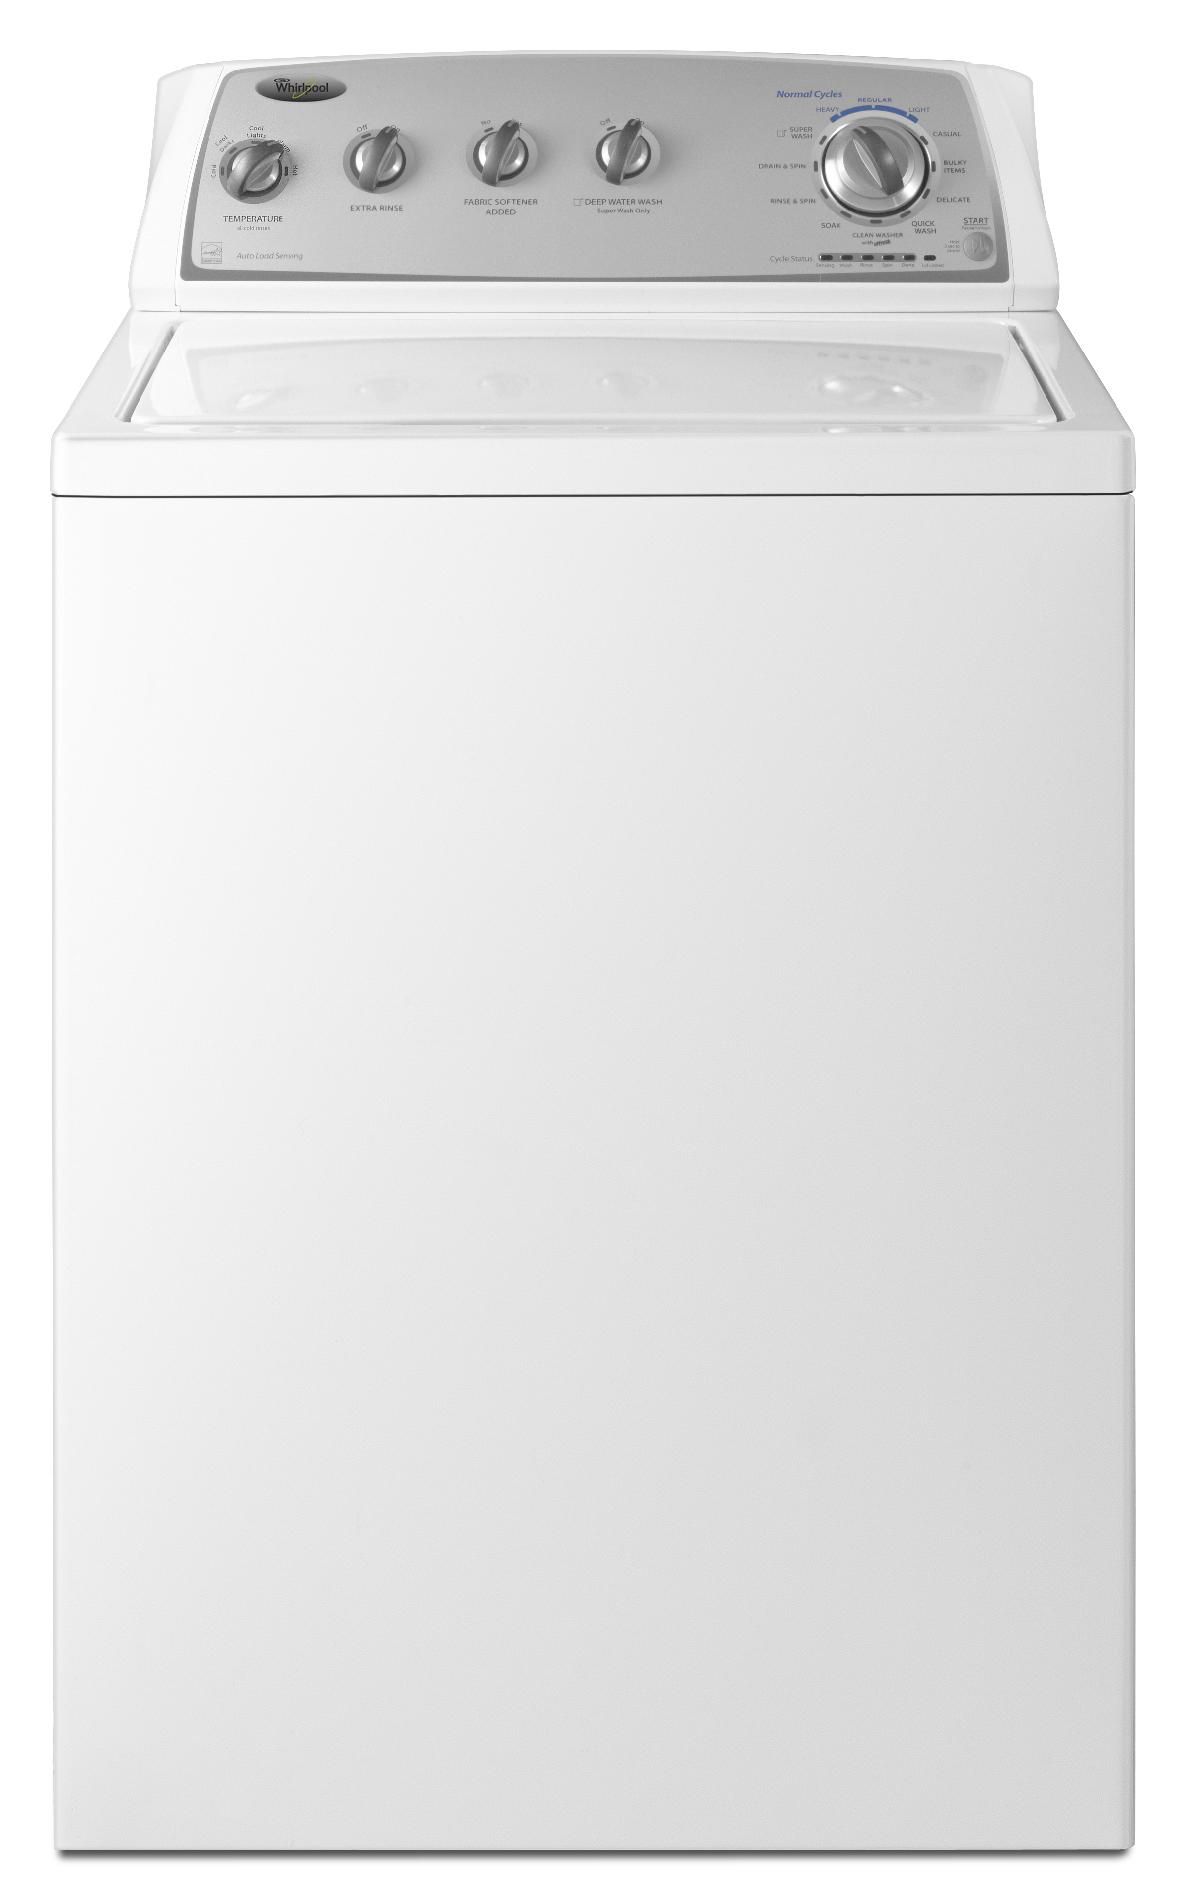 Whirlpool 3.4 cu. ft. Top-Load Washer w/ Xtra Roll Action Plus Agitator - White